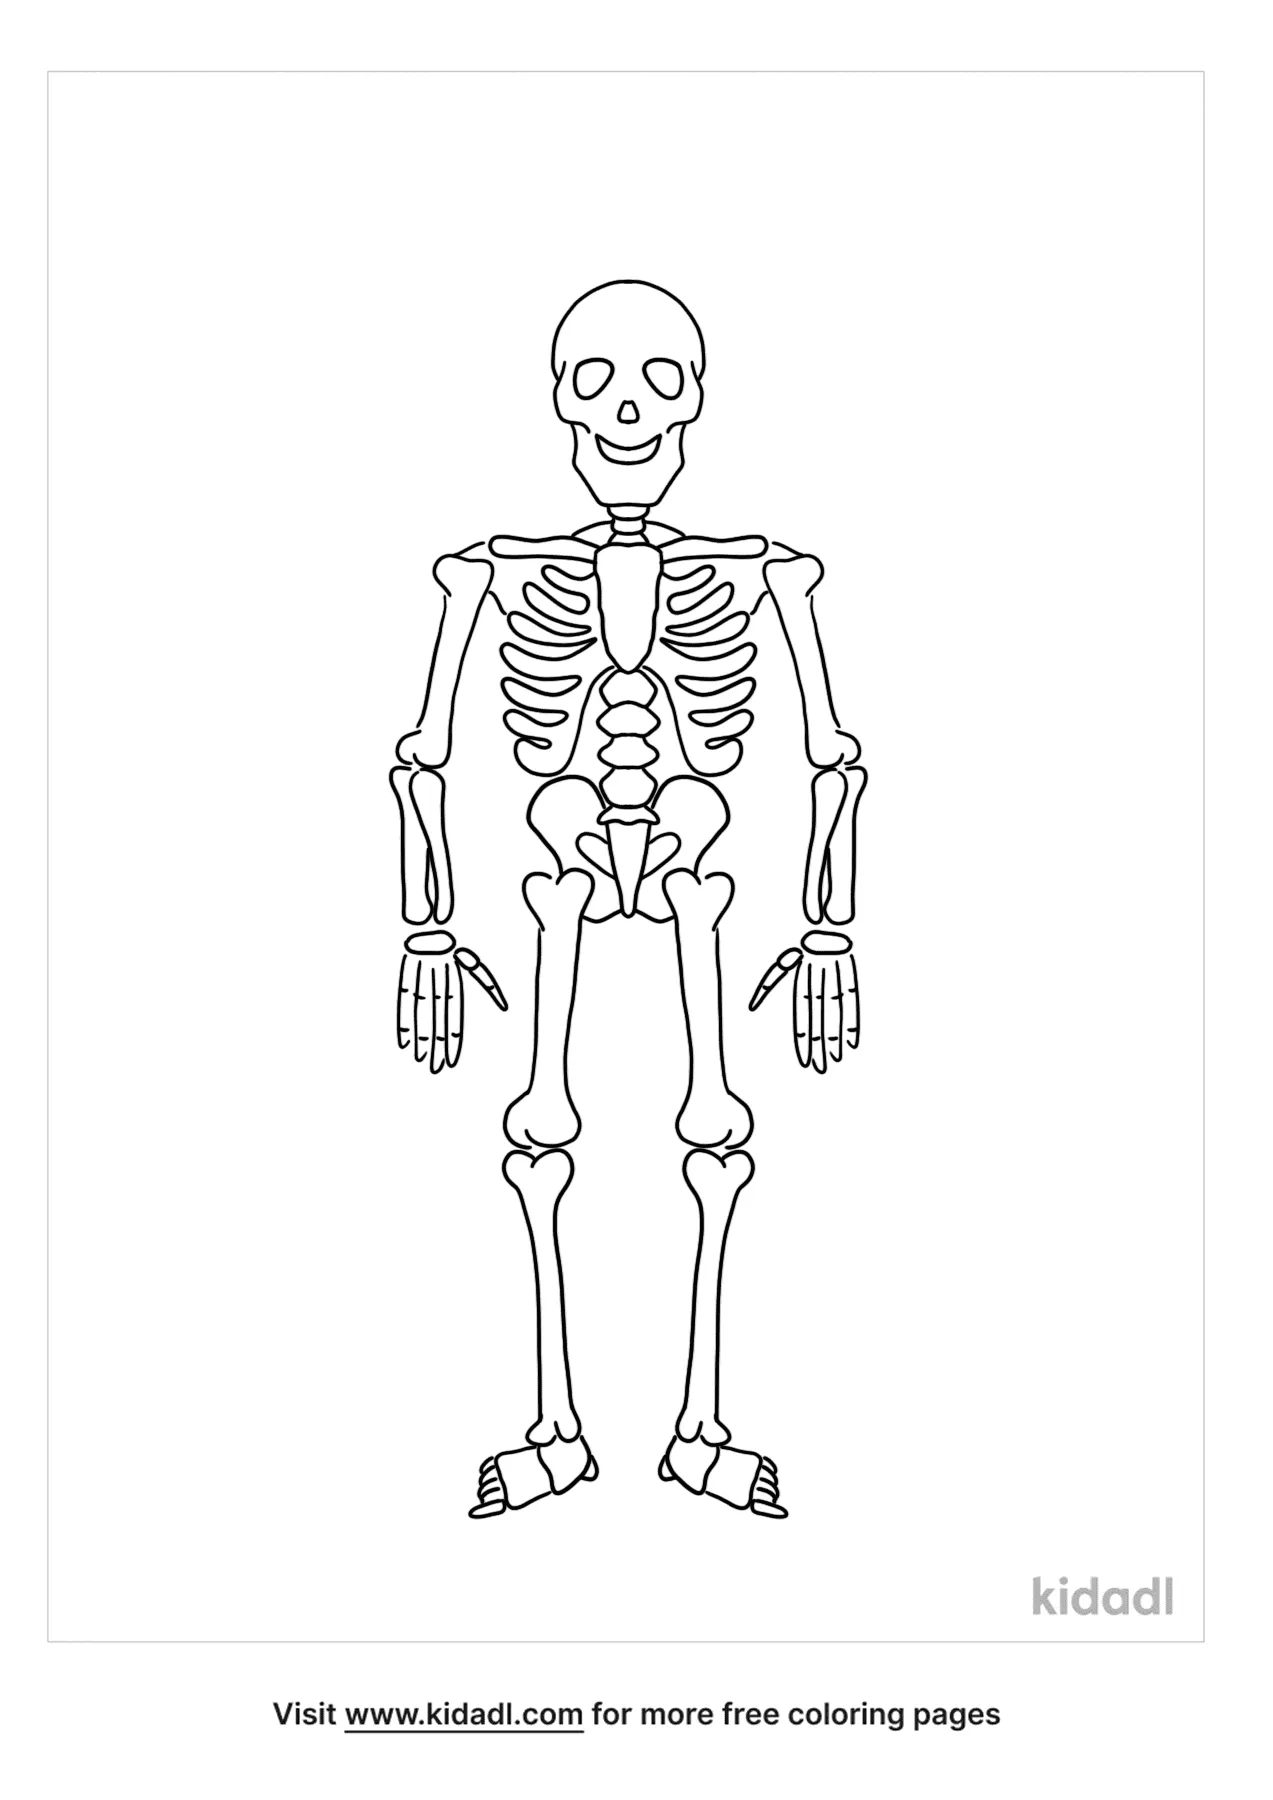 Skeletal System Coloring Page